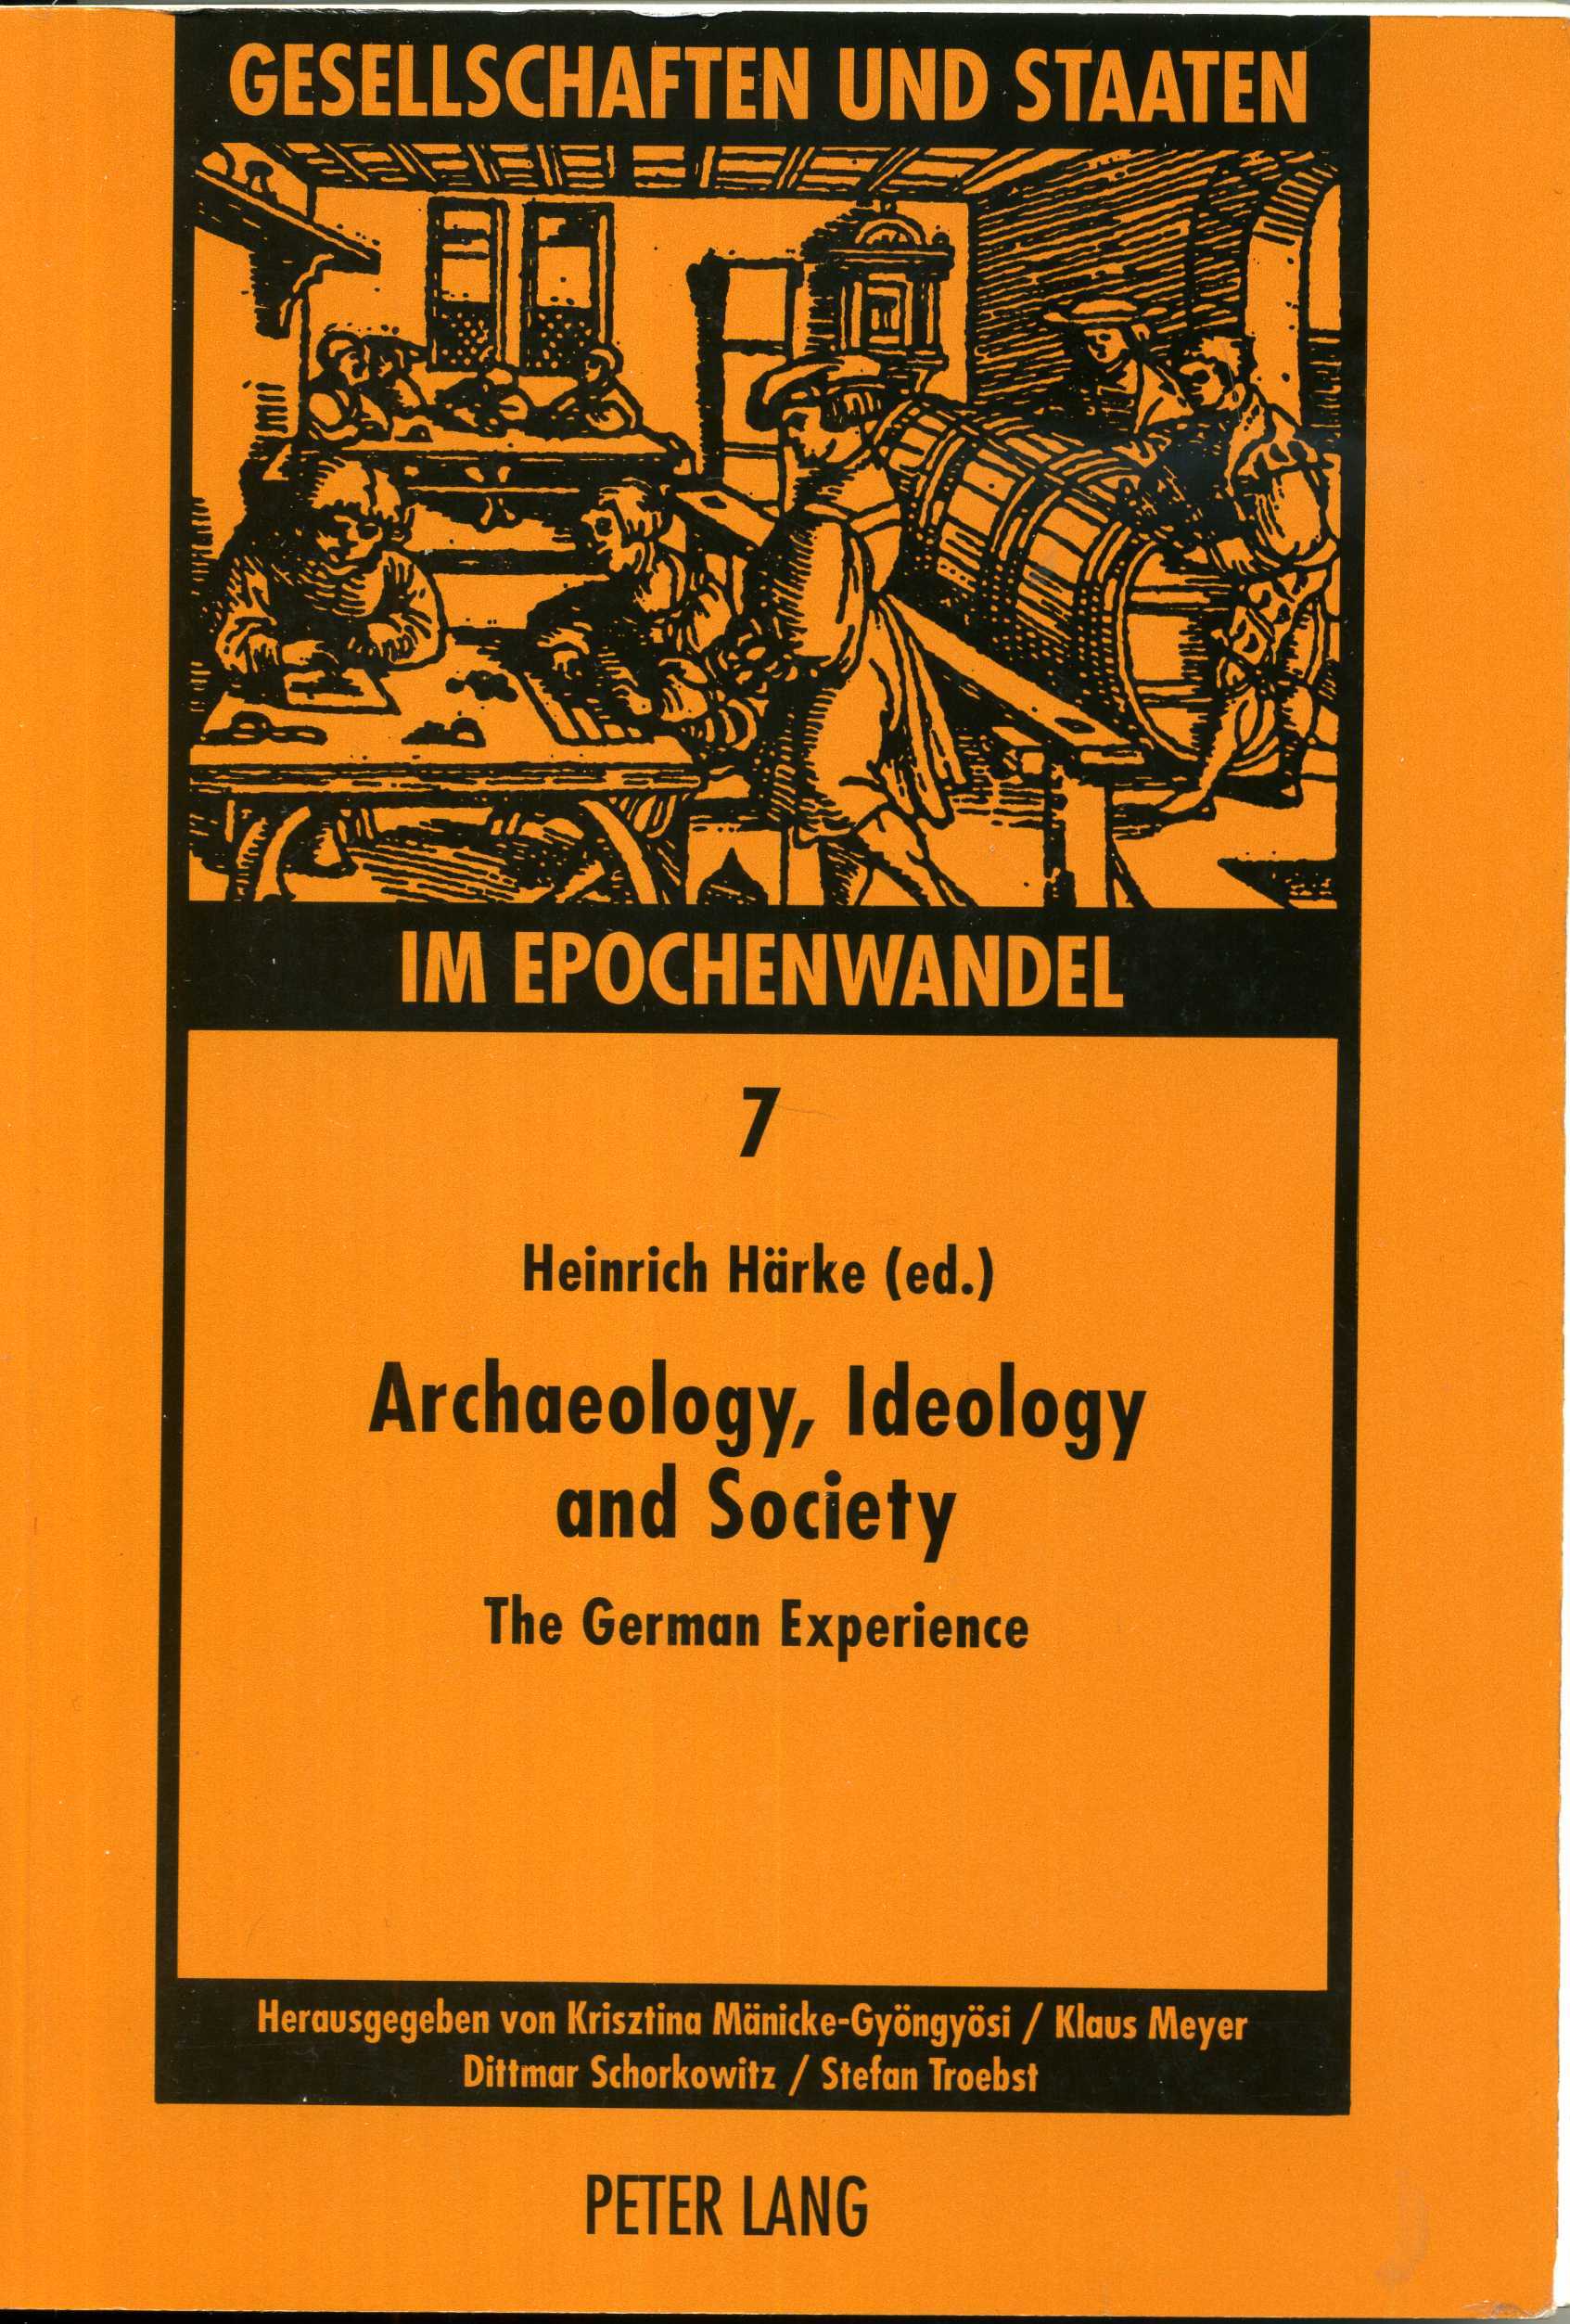 Archaeology, ideology and society: The German experience